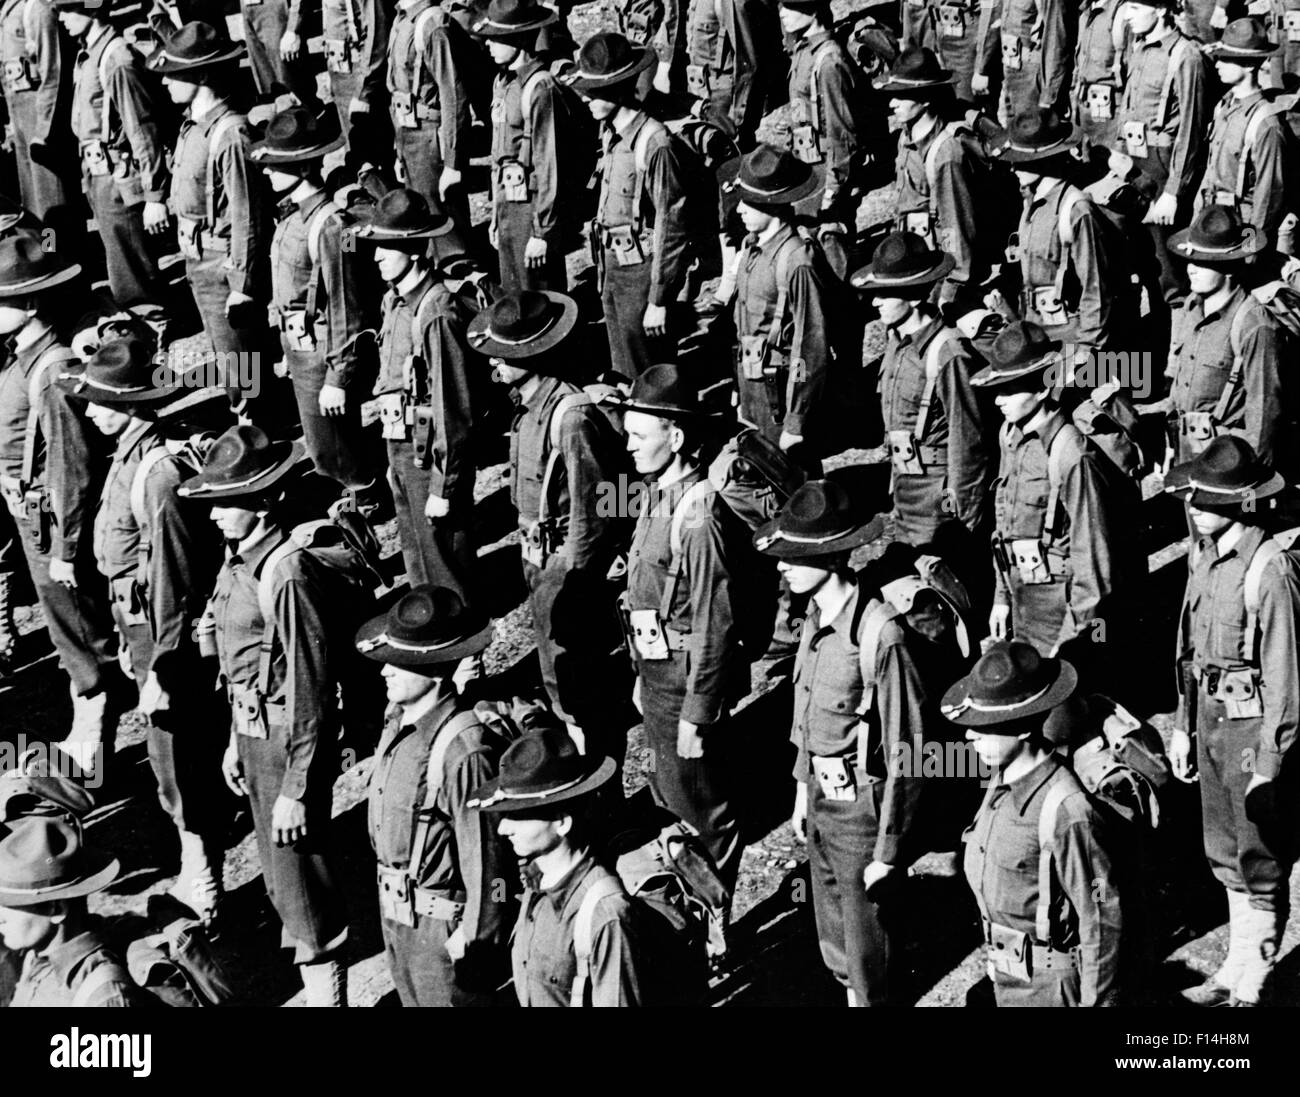 1910s 1917 WORLD WAR I US ARMY TROOPS IN FORMATION Stock Photo